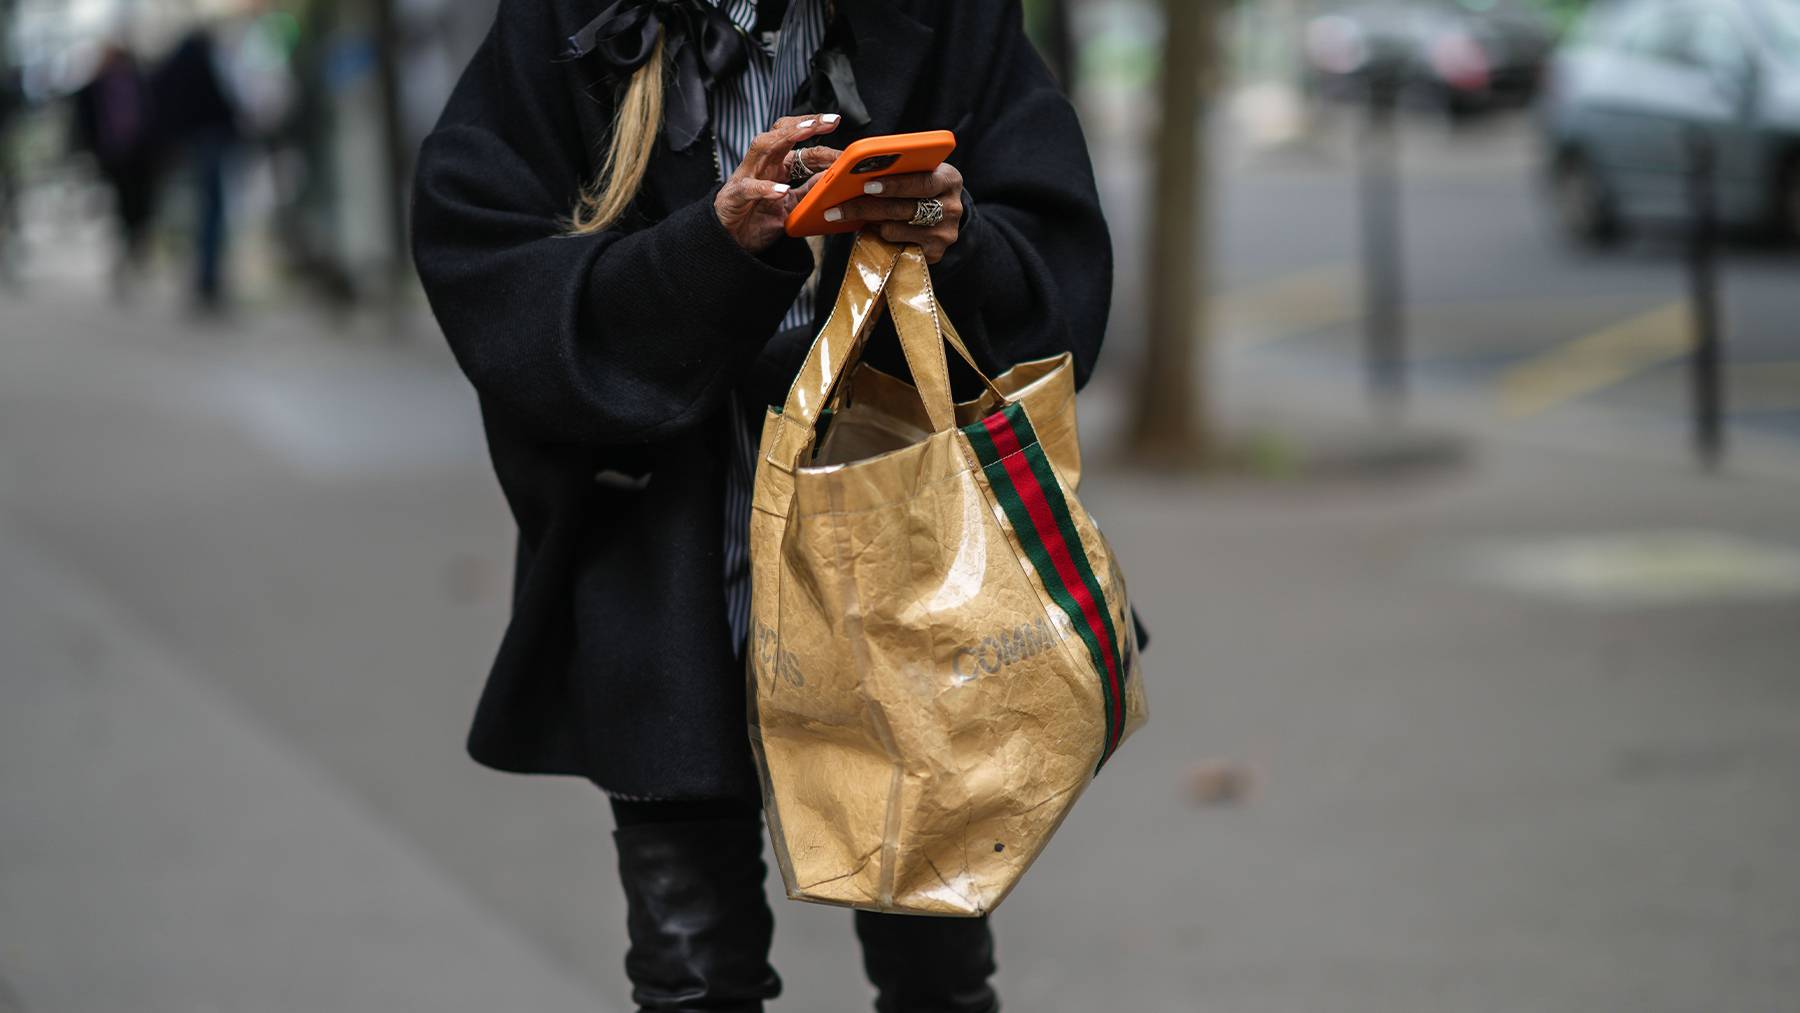 Person carrying a Gucci bag while texting.